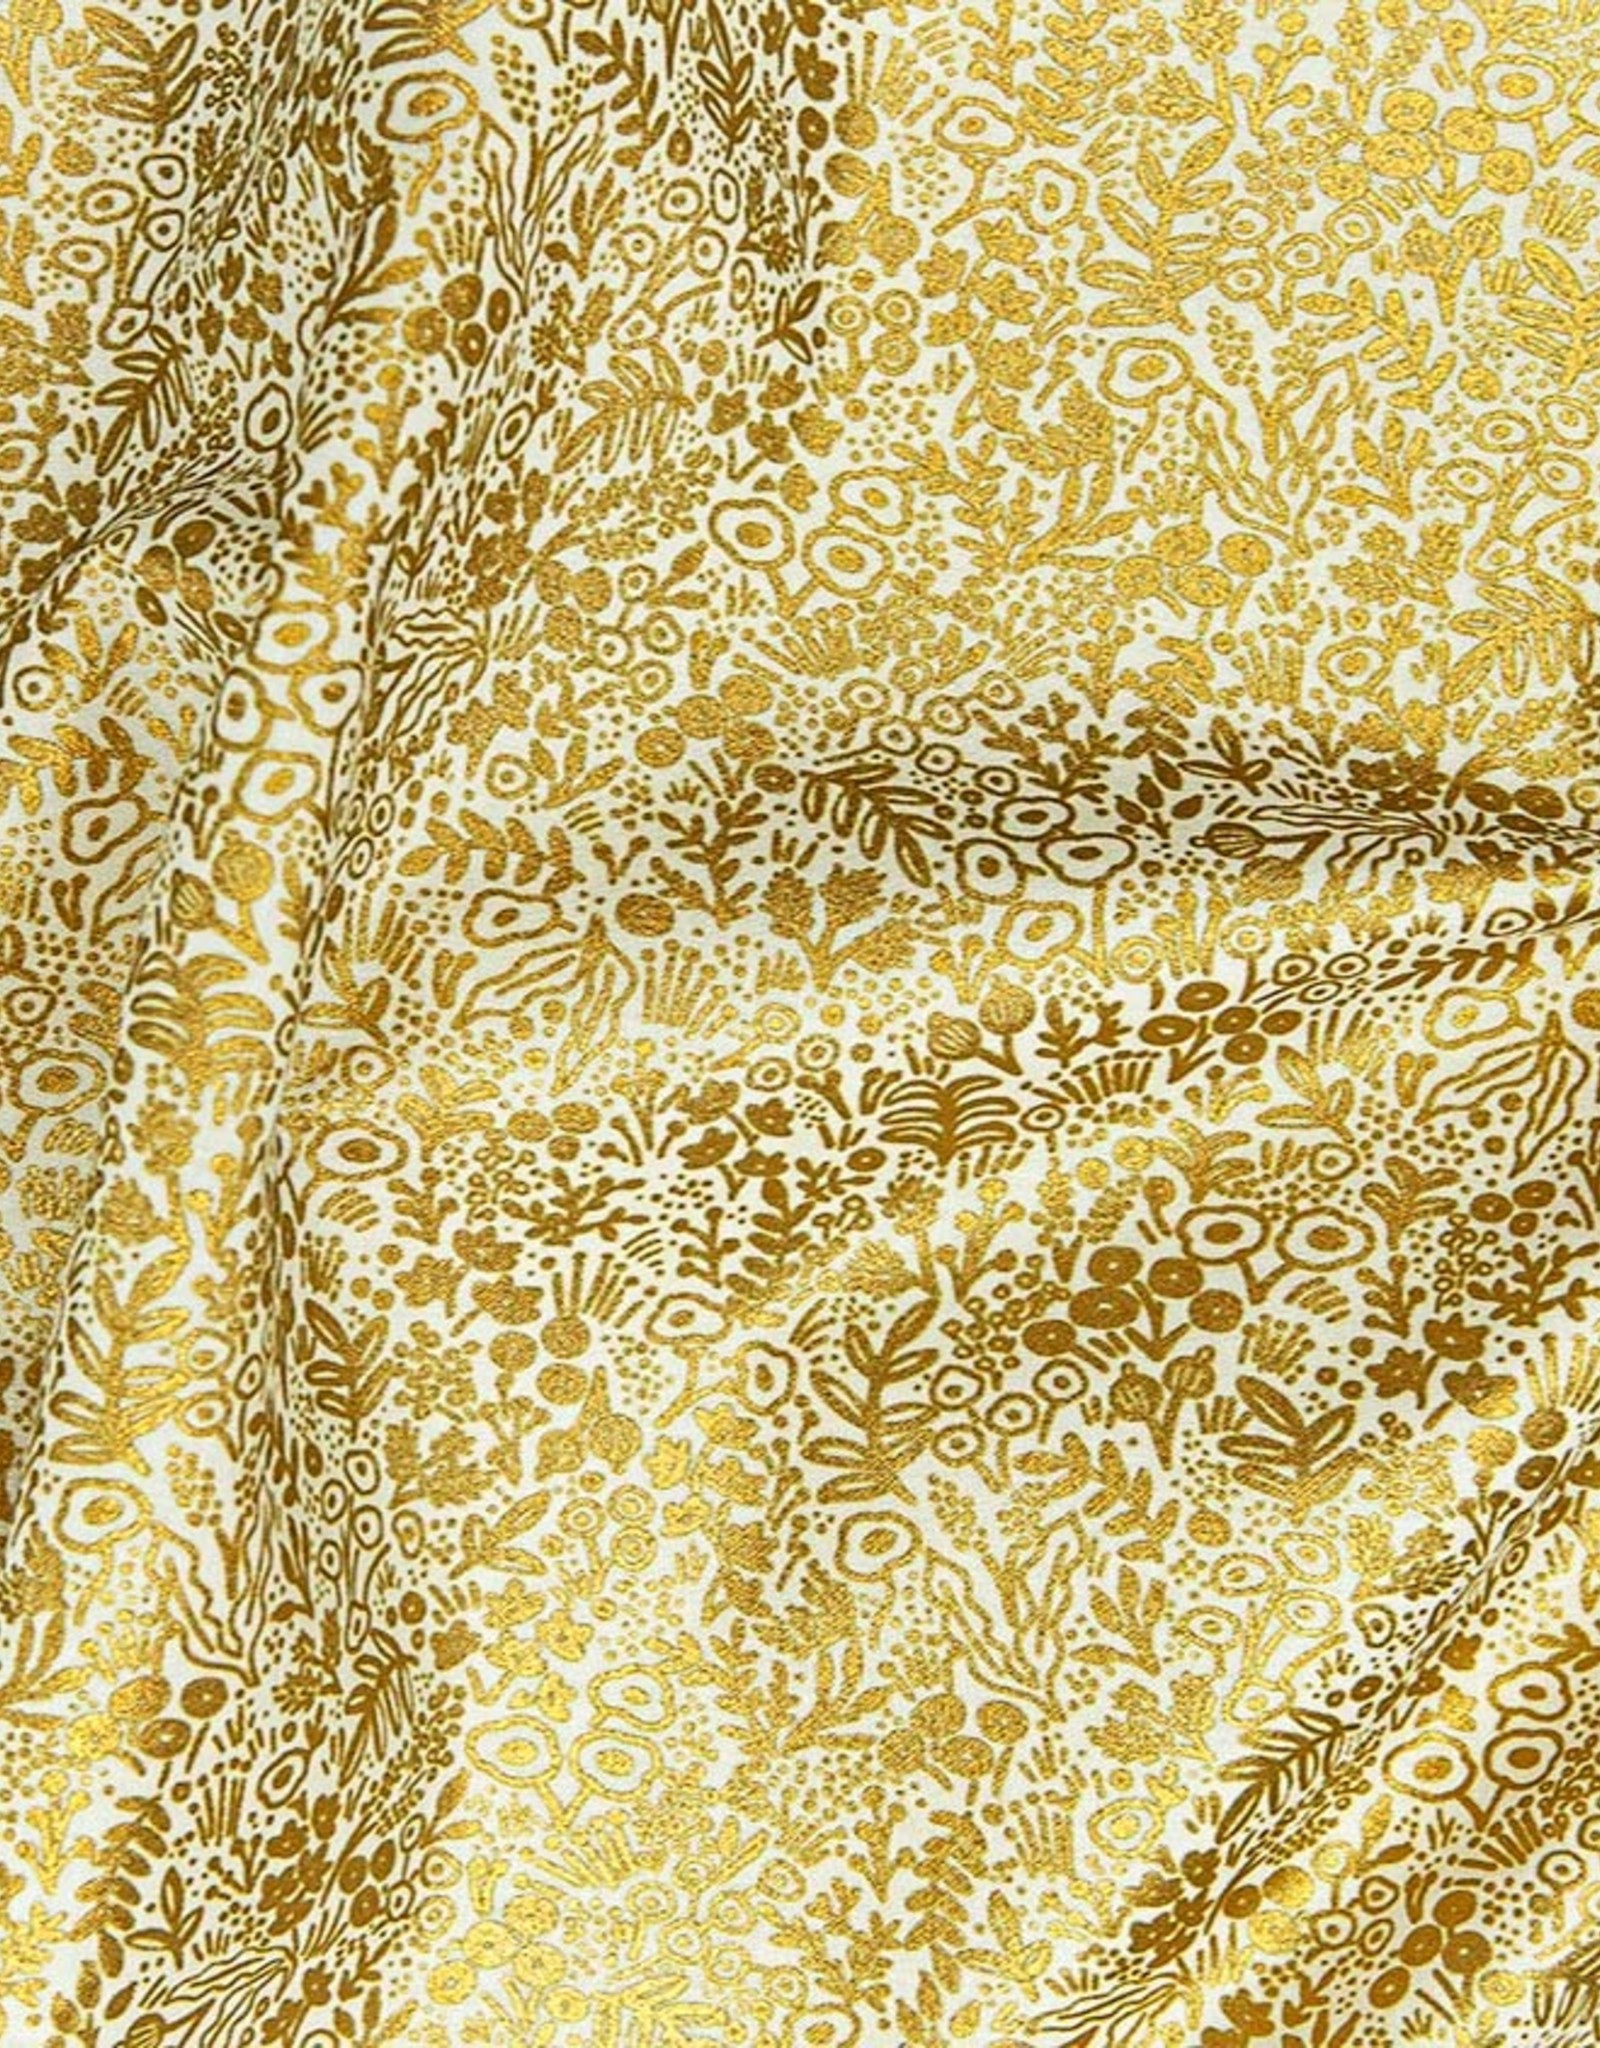 Cotton + Steel Rifle Paper Co. Basics Tapestry Lace Gold Metallic